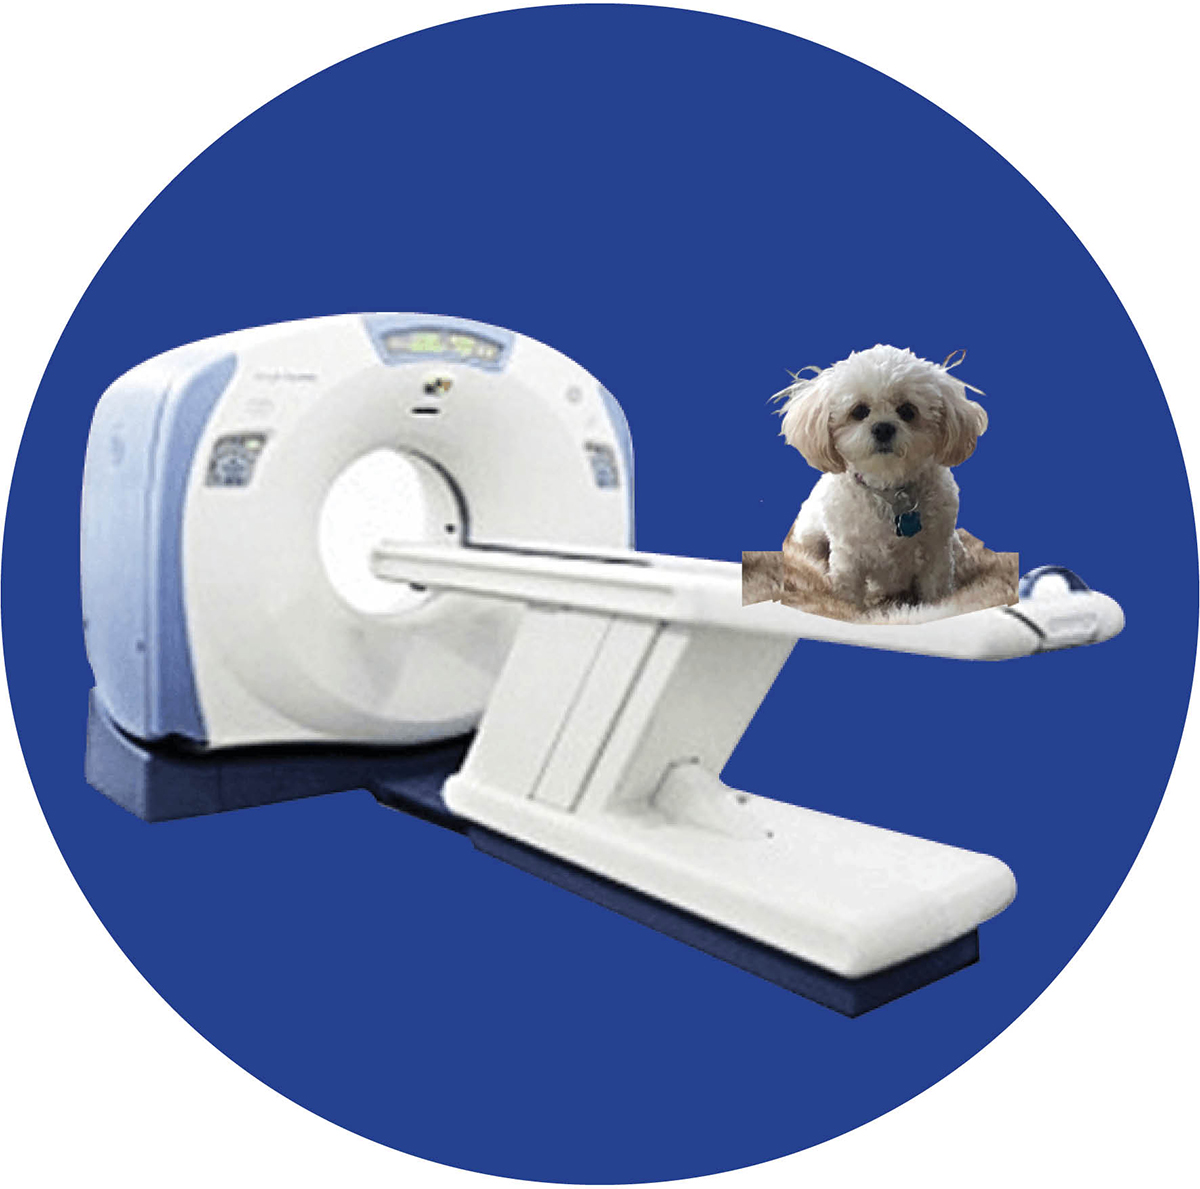 ct-scanners-that-veterinarians-should-consider